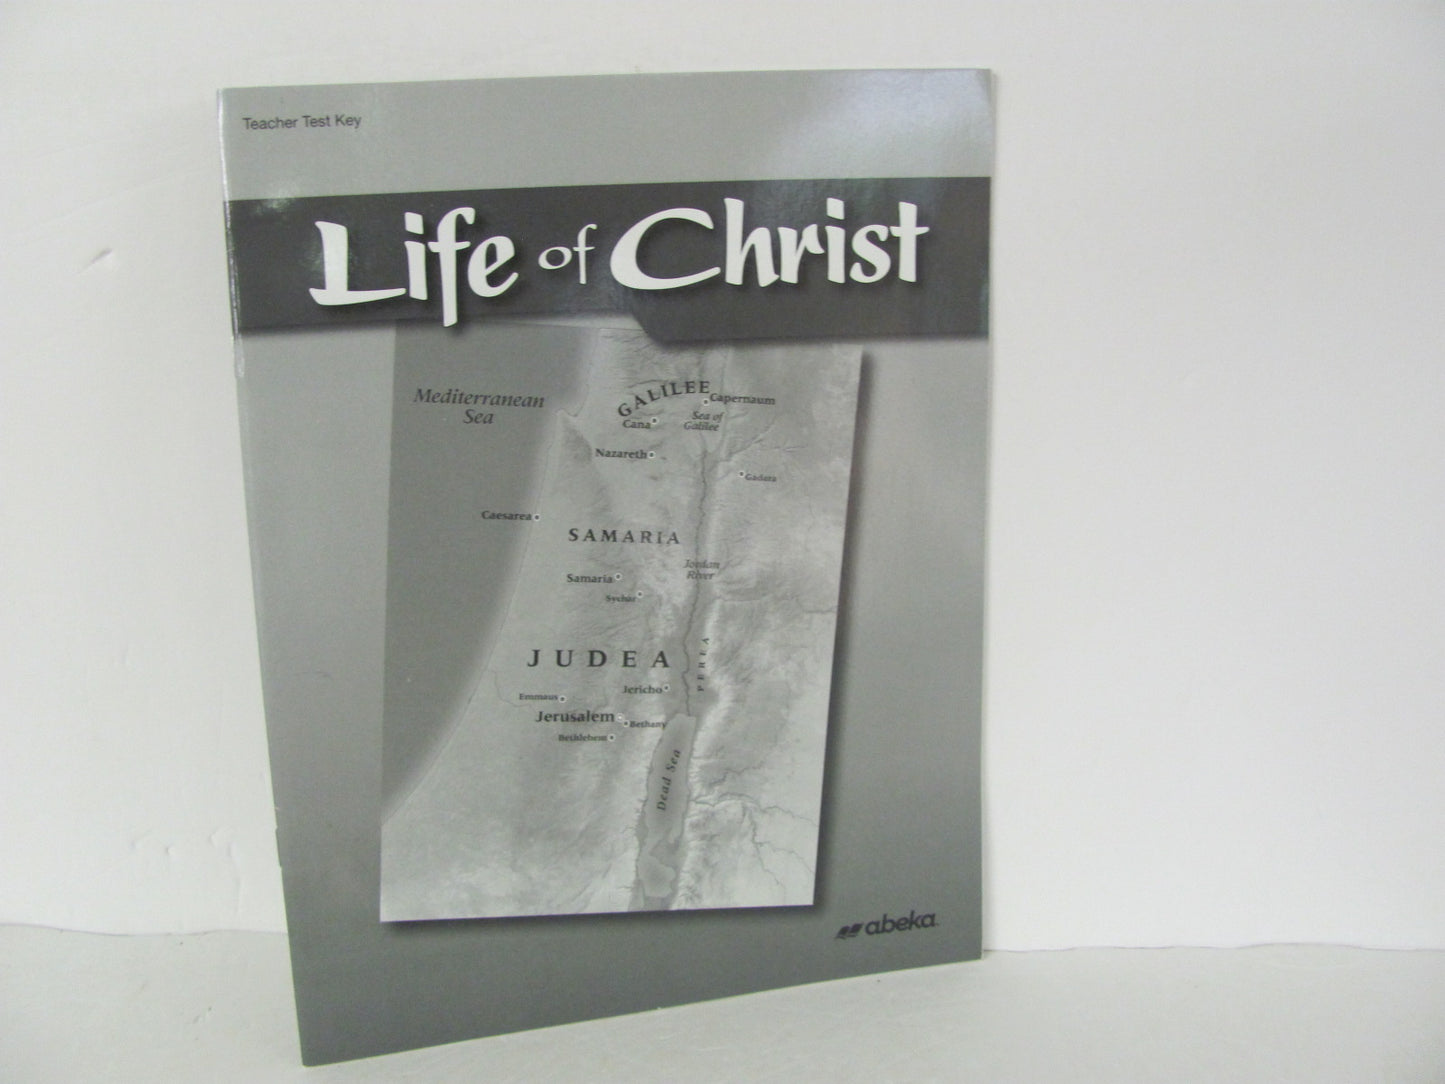 Life of Christ Abeka Test Key Pre-Owned 7th Grade Bible Textbooks